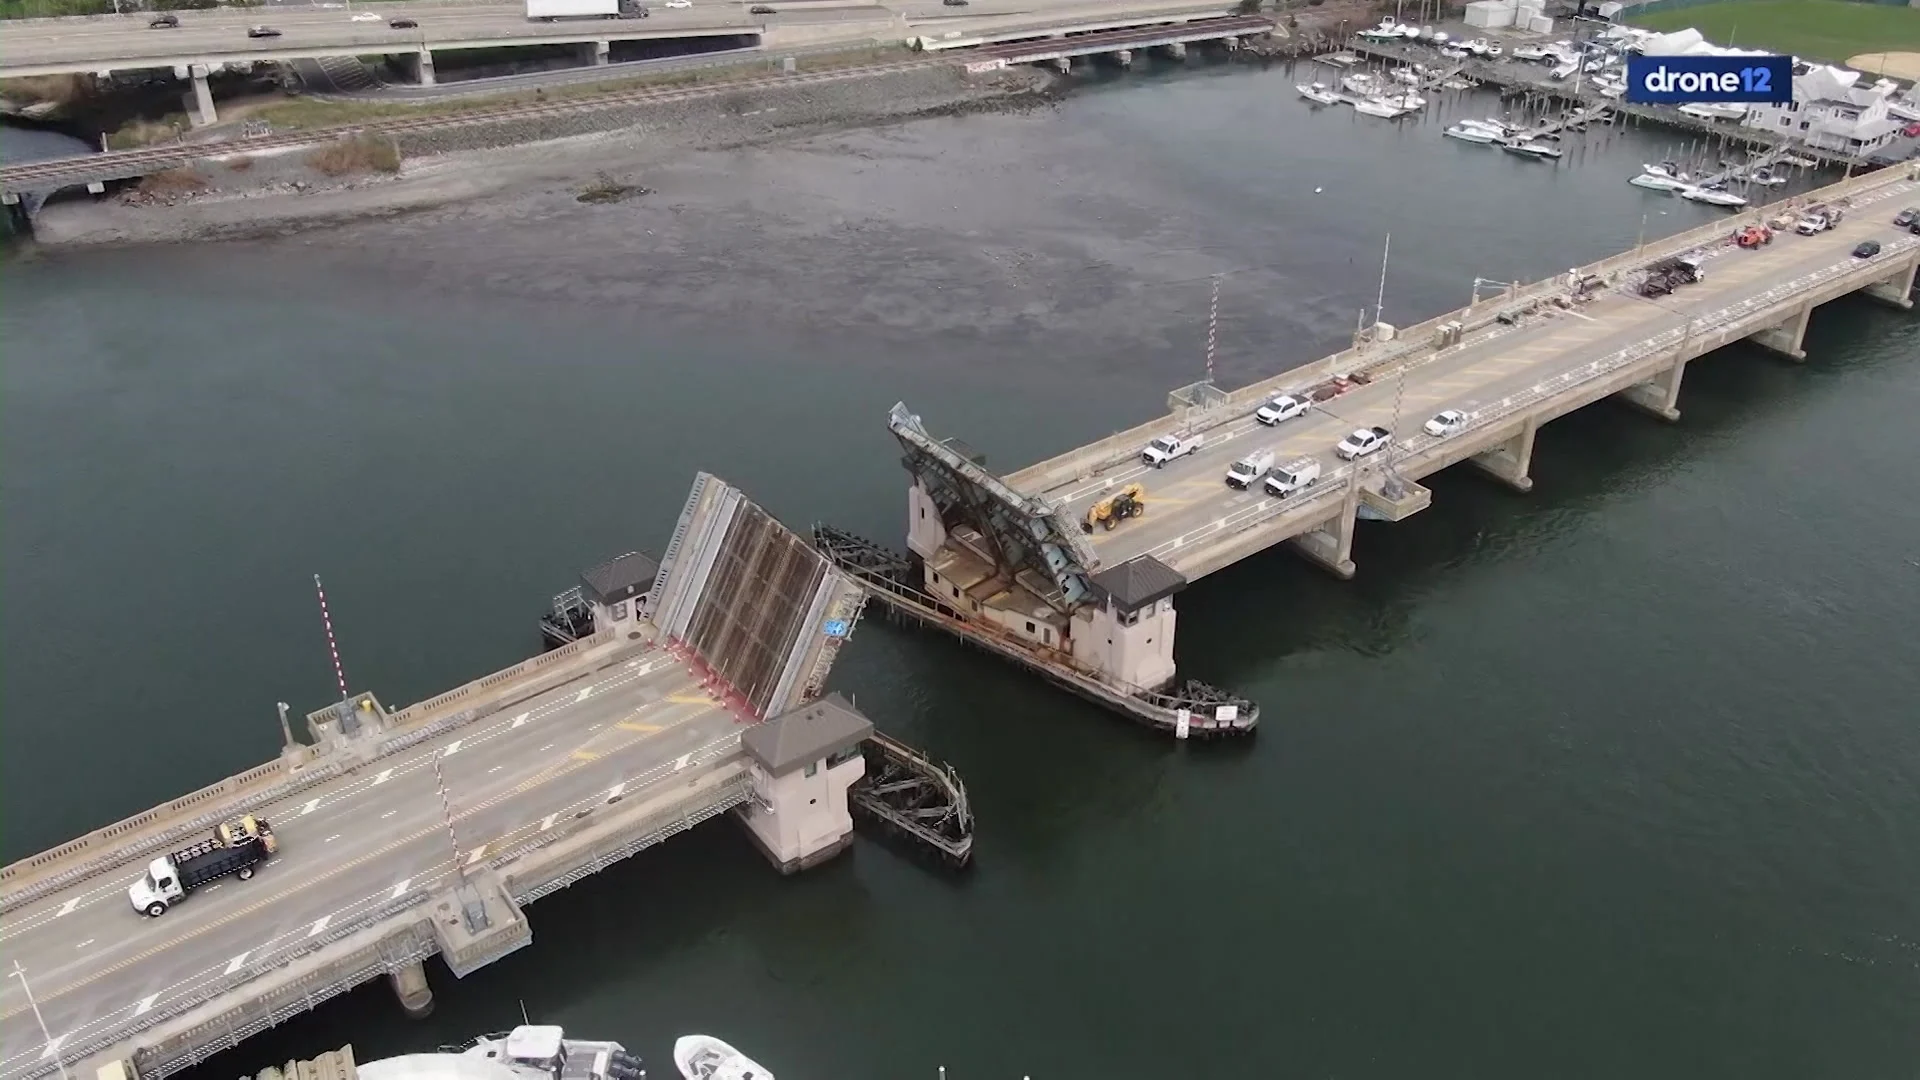 Business owners report revenue loss as Route 71 bridge remains stuck in upright position.